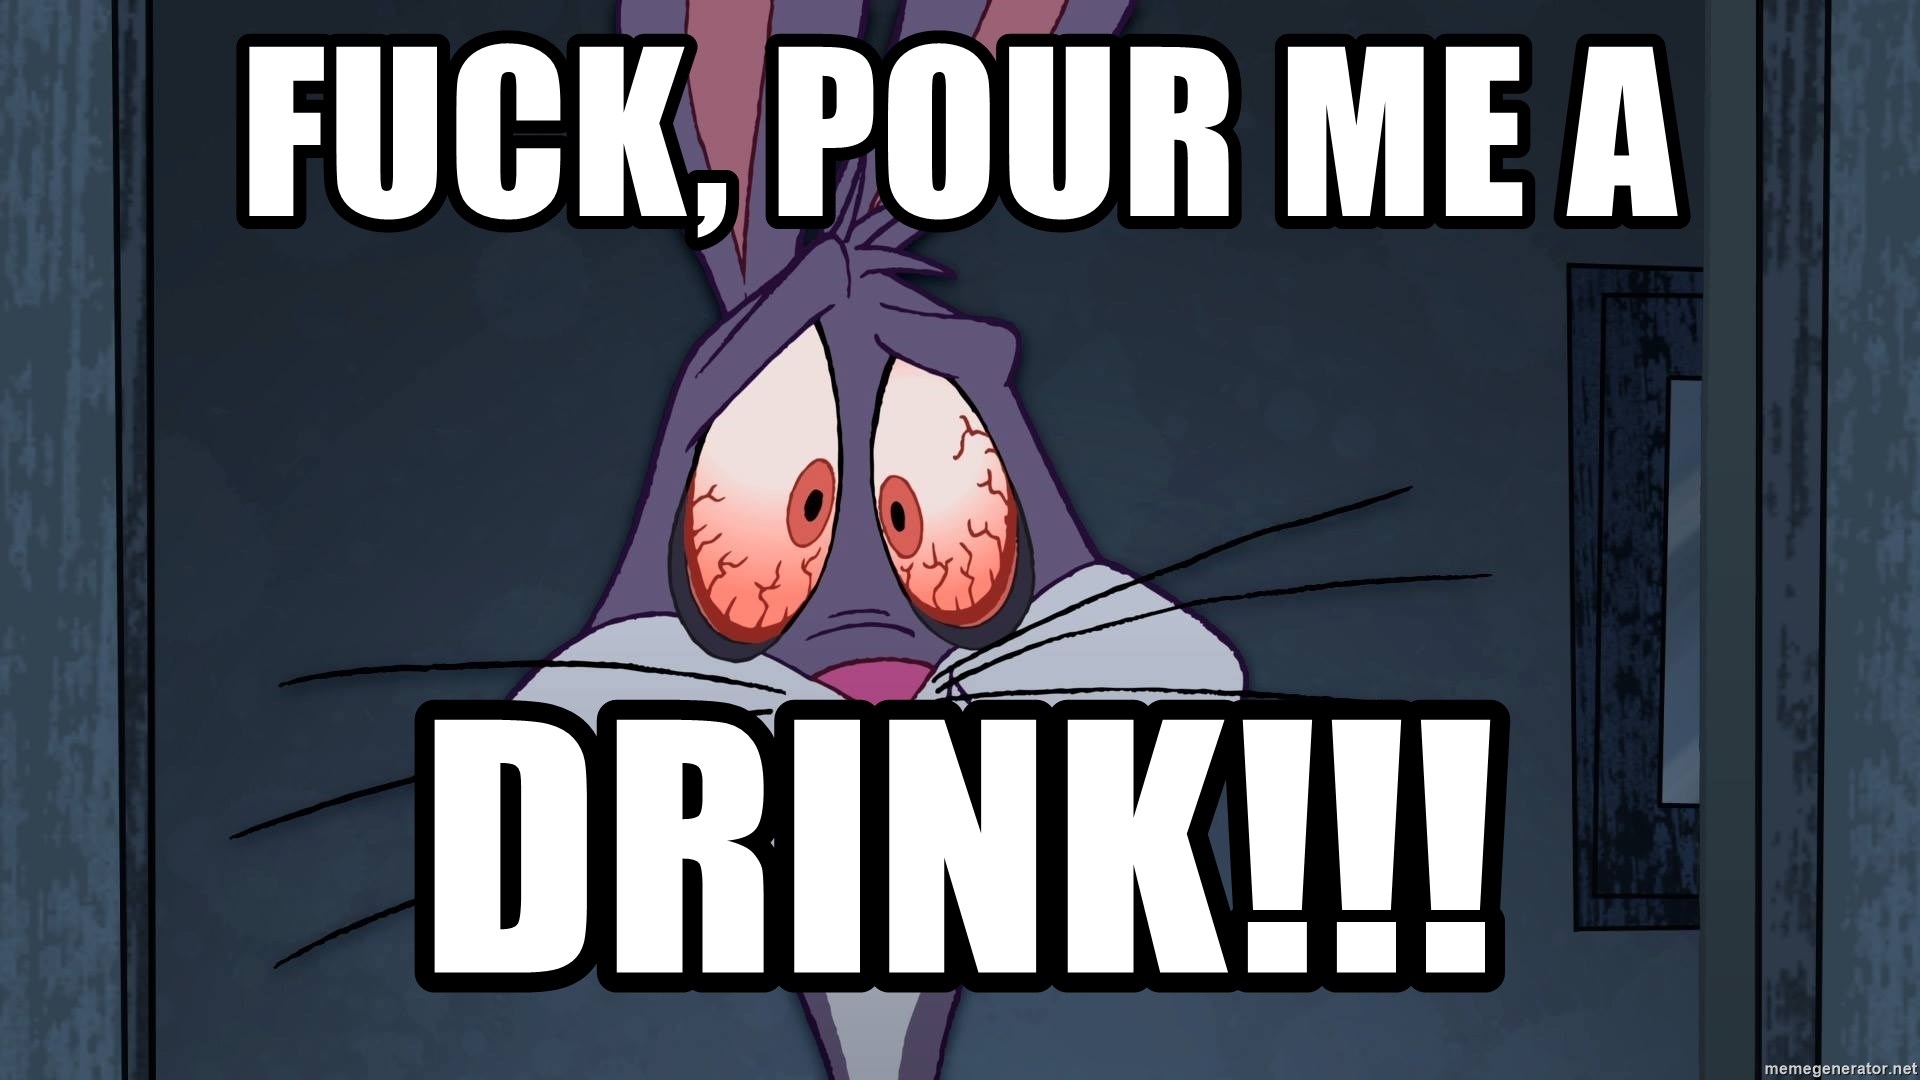 Bugs Bunny Lost - Fuck, pour me a  Drink!!!